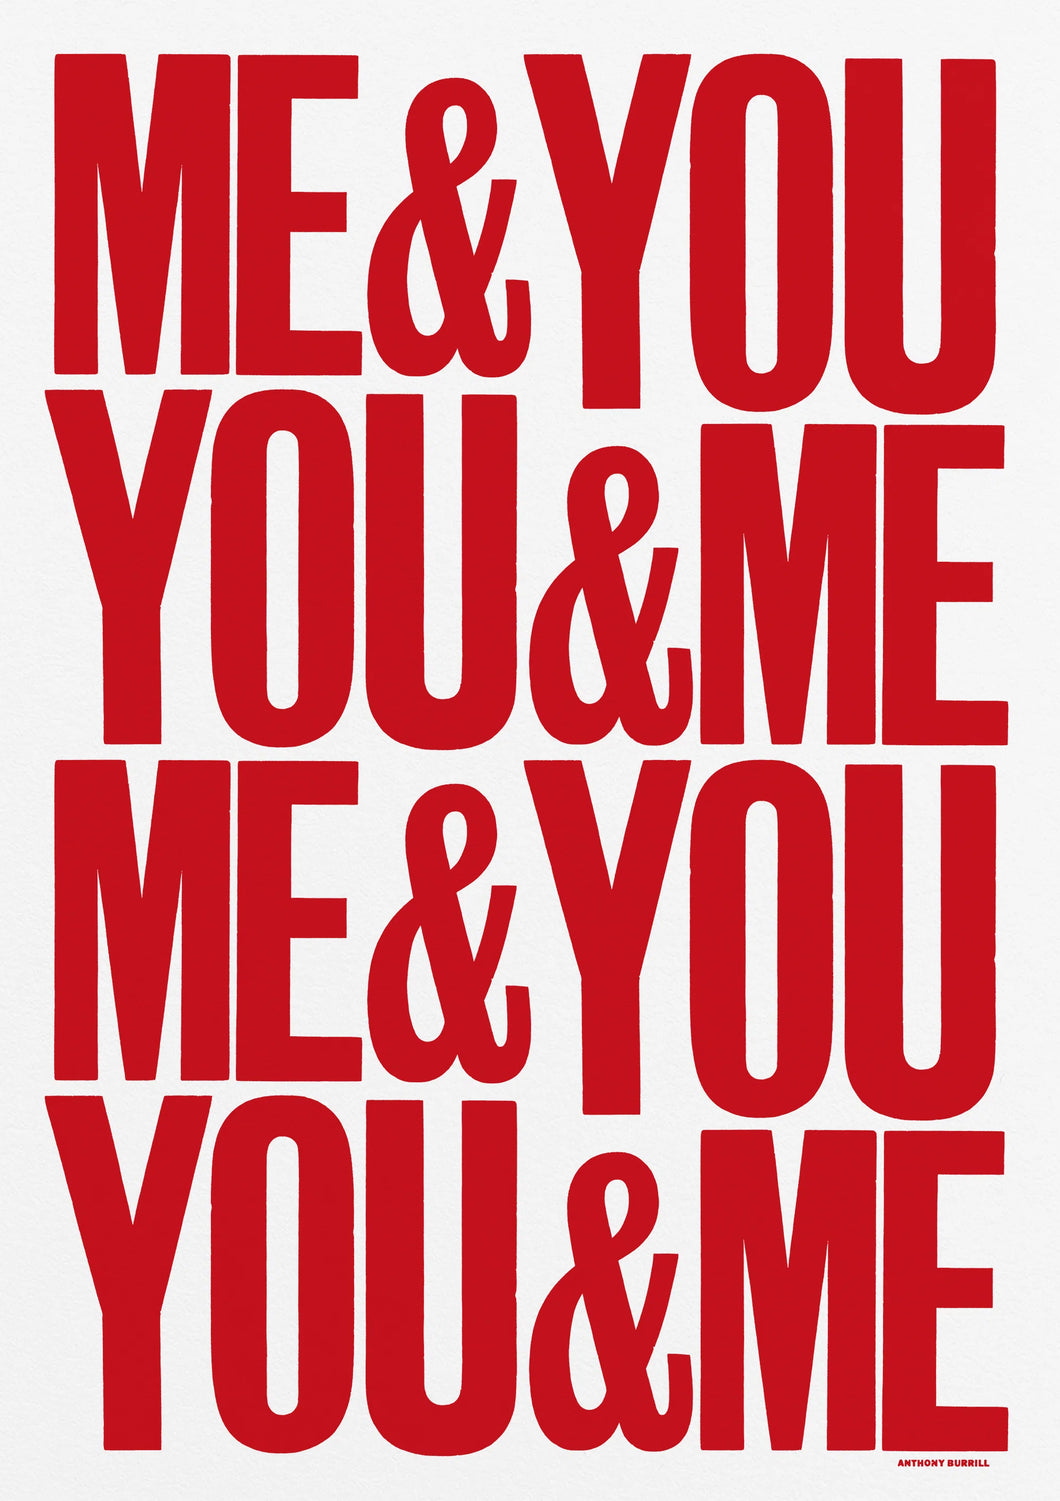 Anthony Burrill - Me and You and You and Me (Red)